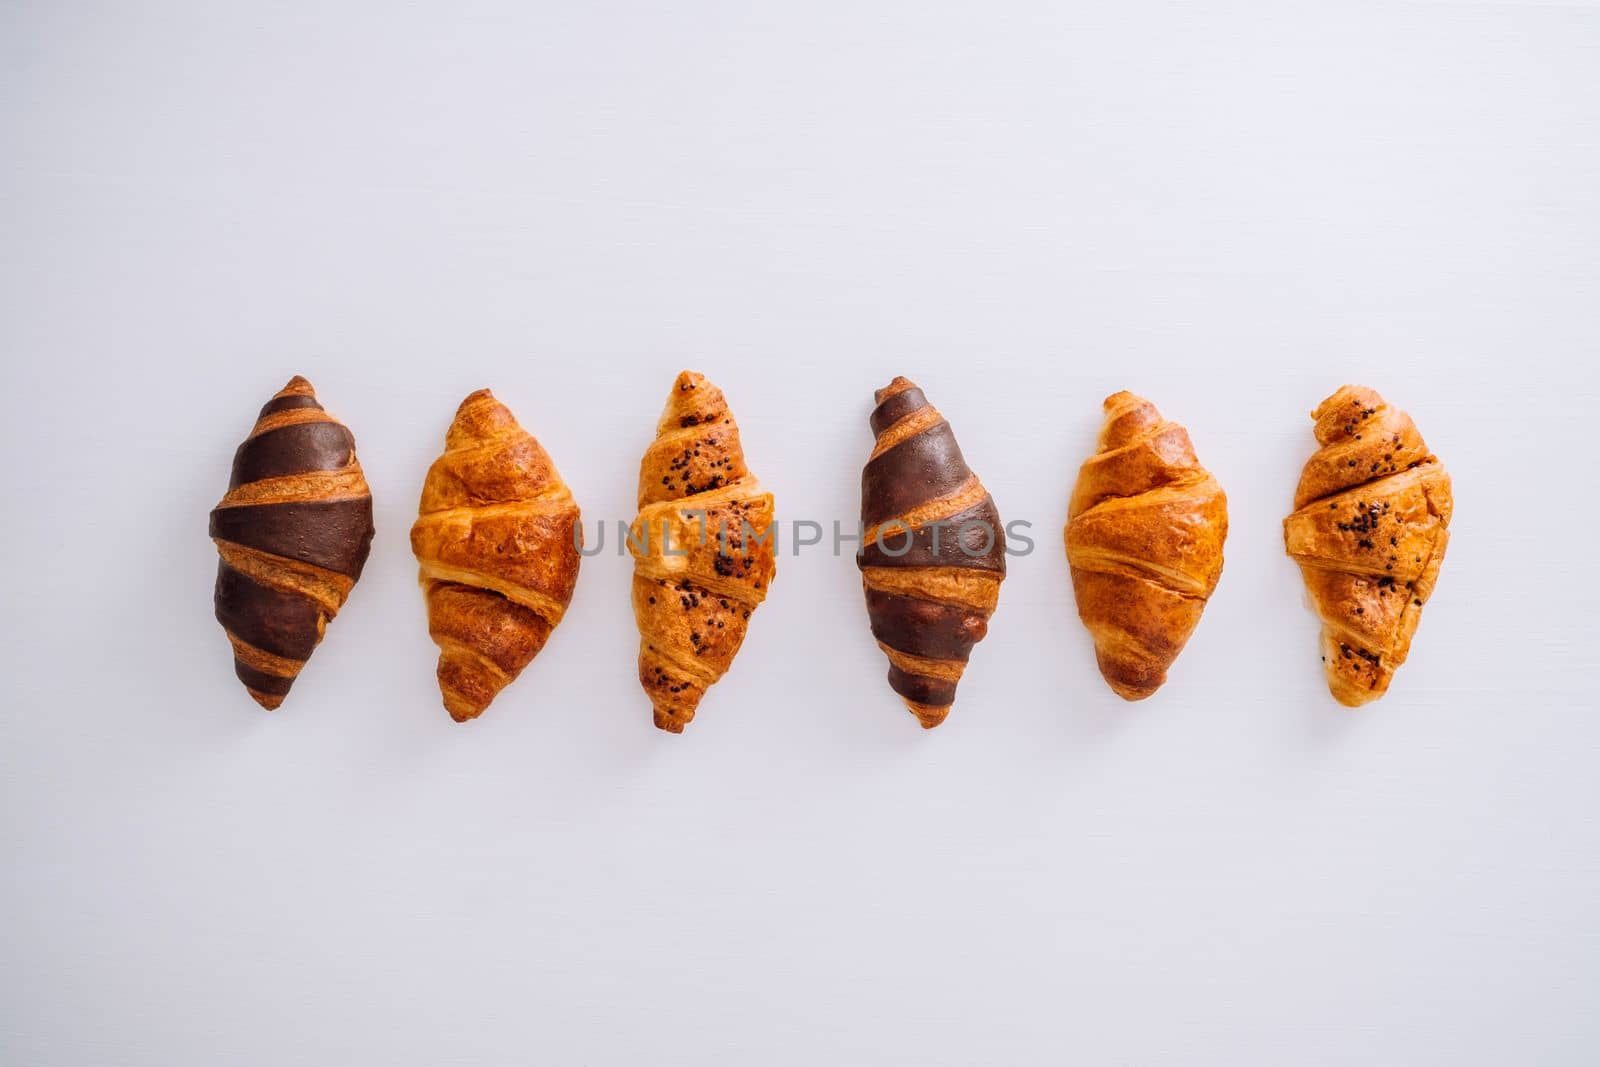 Flat lay of several delicious brown and chocolate croissants laid out in a line on a white table by Romvy